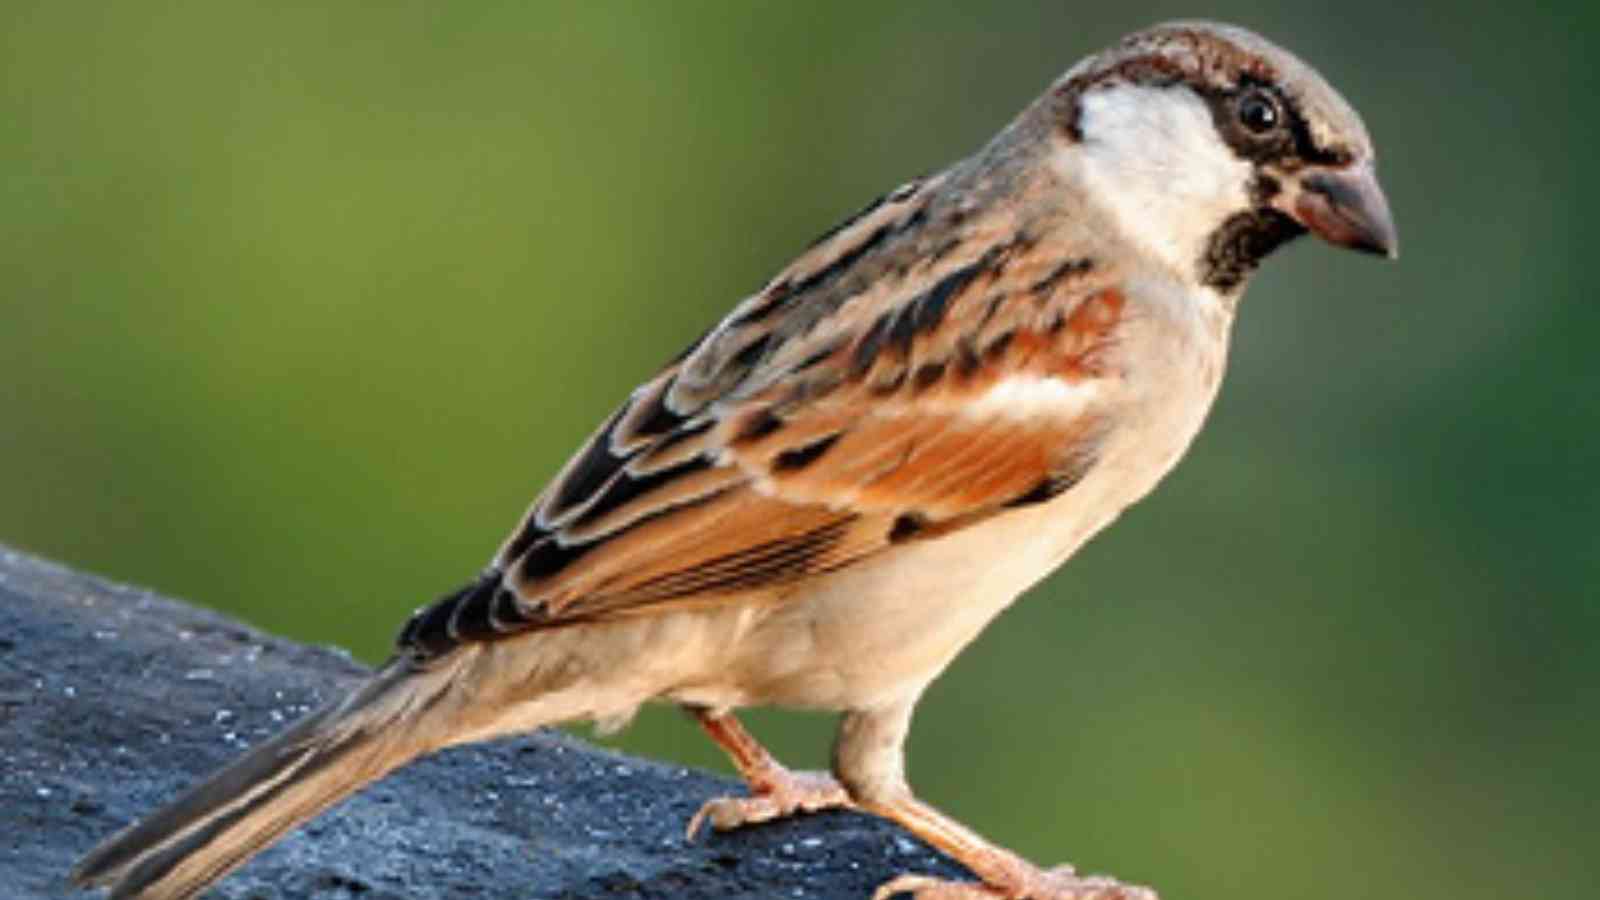 World Sparrow Day 2023: Date, History, Facts about Sparrows